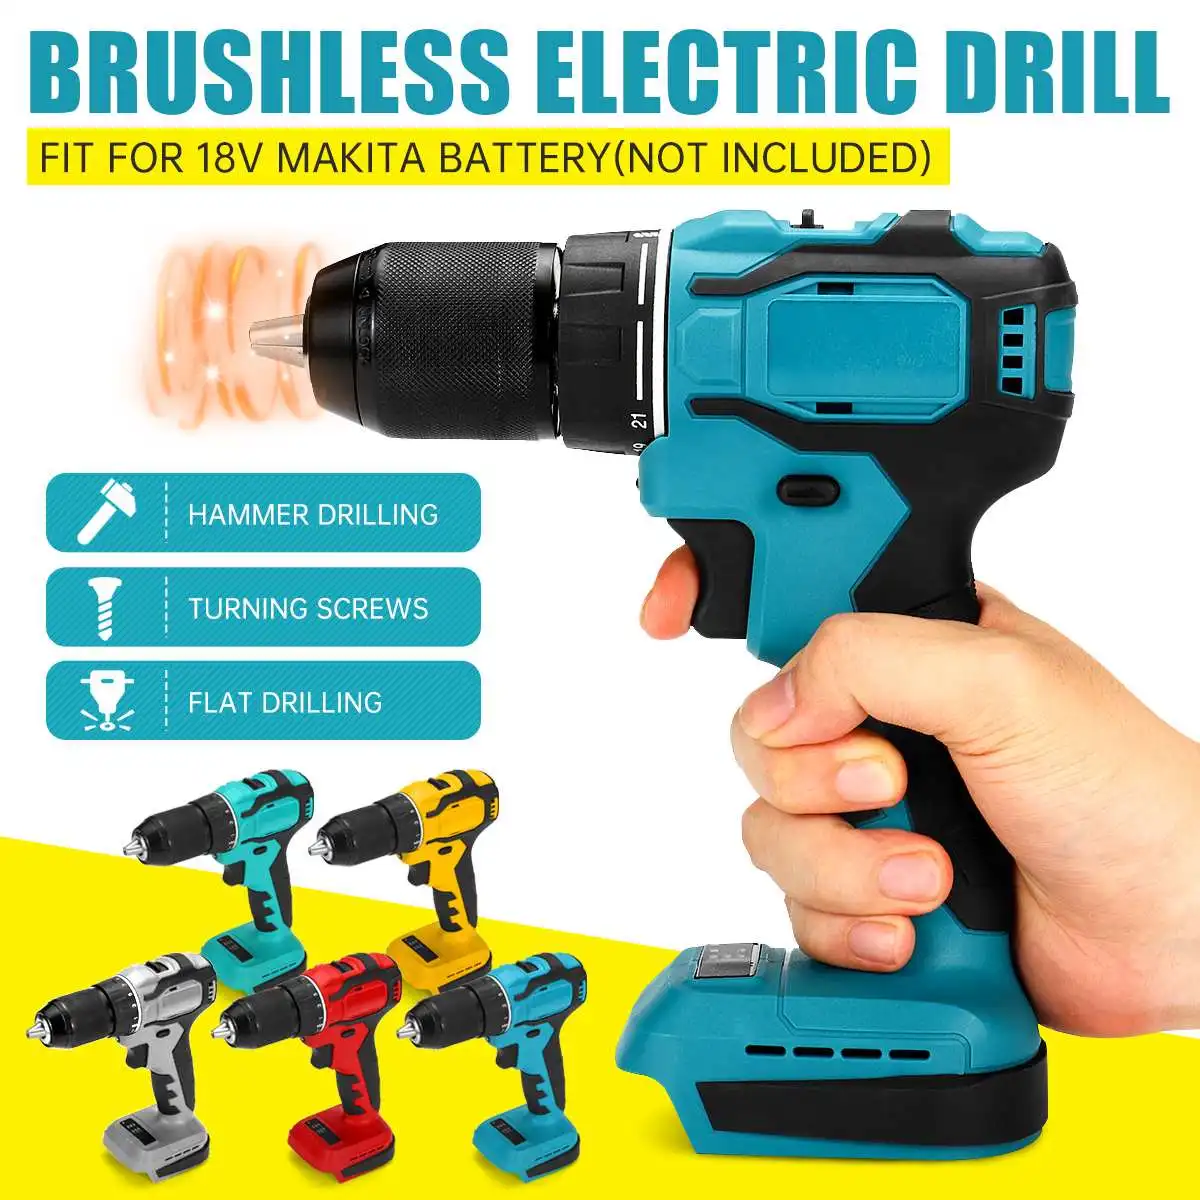 

13mm 520Nm Electric Cordless Brushless Impact Drill Hammer Drill Screwdriver DIY Power Tool Rechargable For 18V Makita Battery